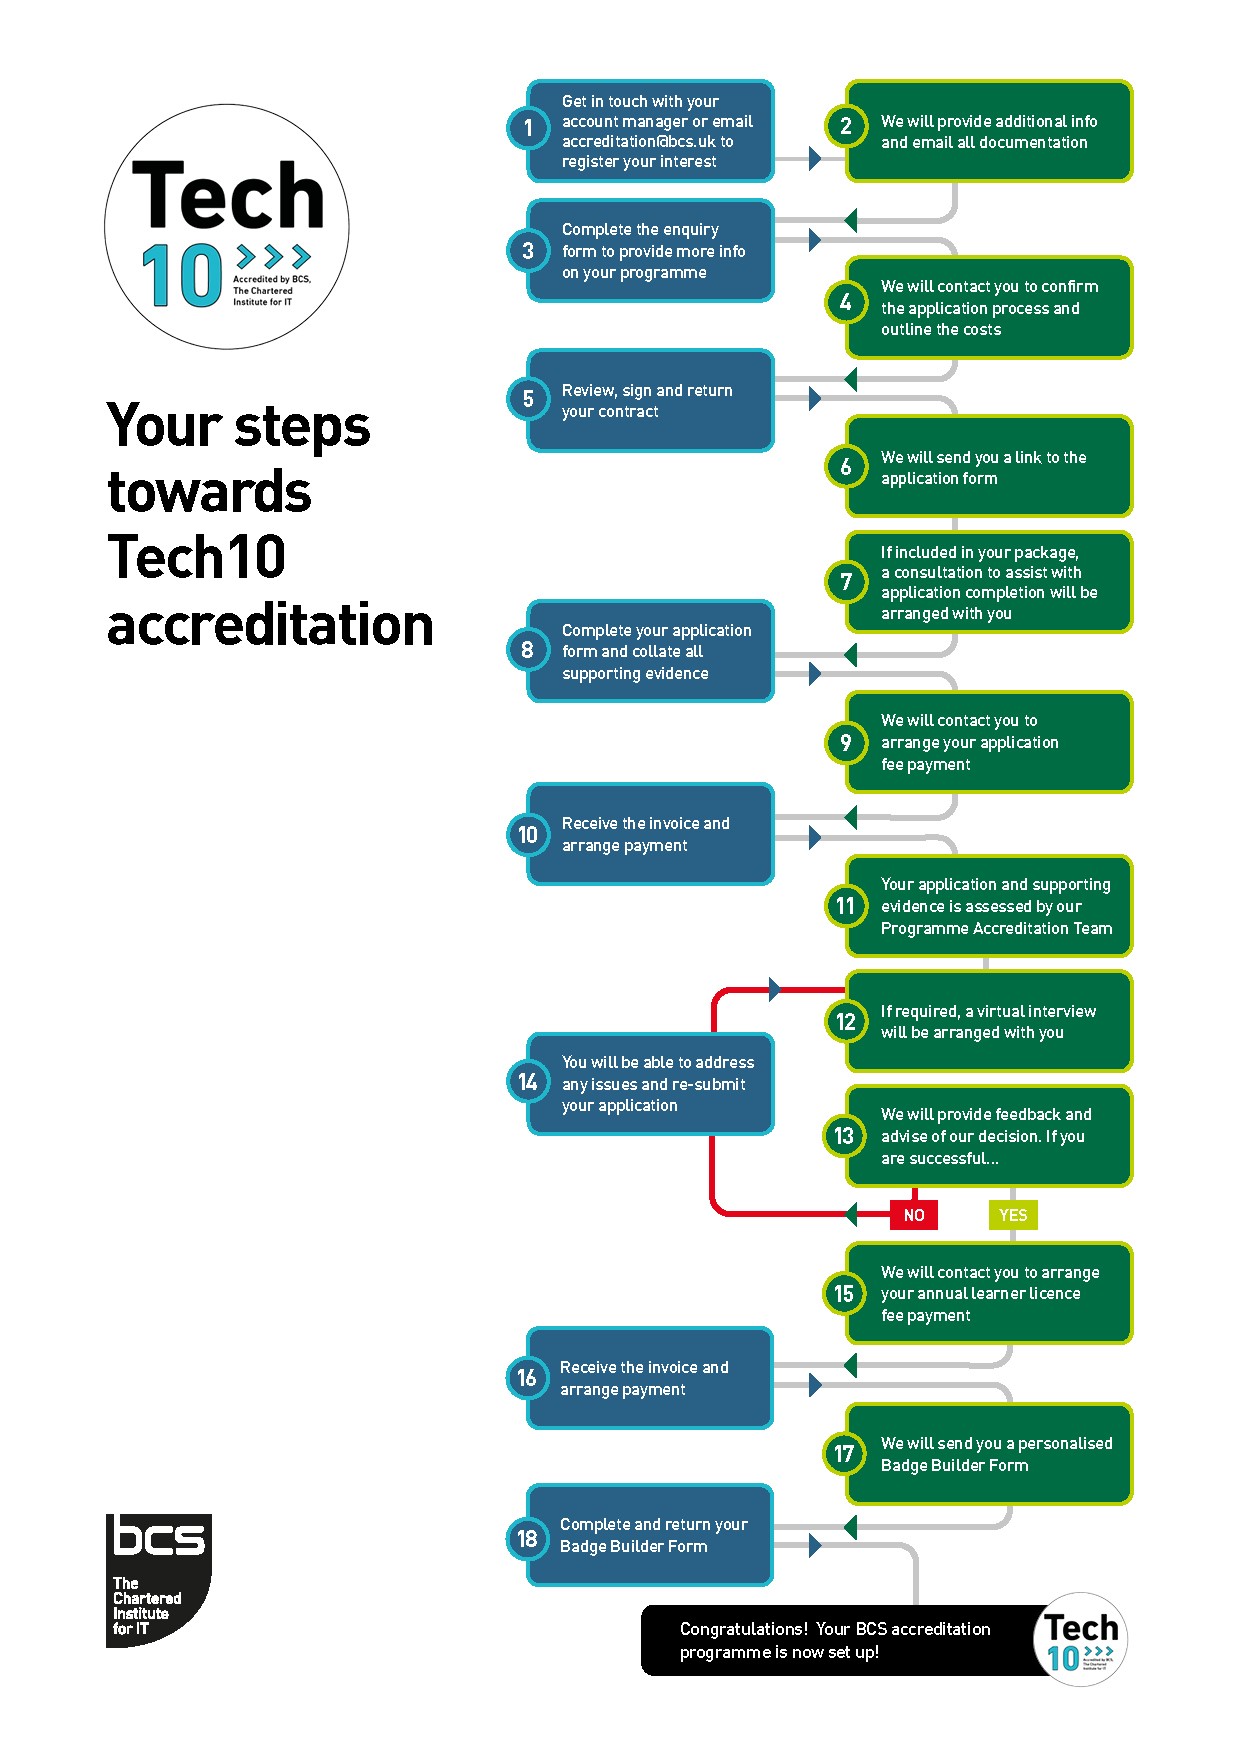 Step by step guide to Tech10 accreditation process